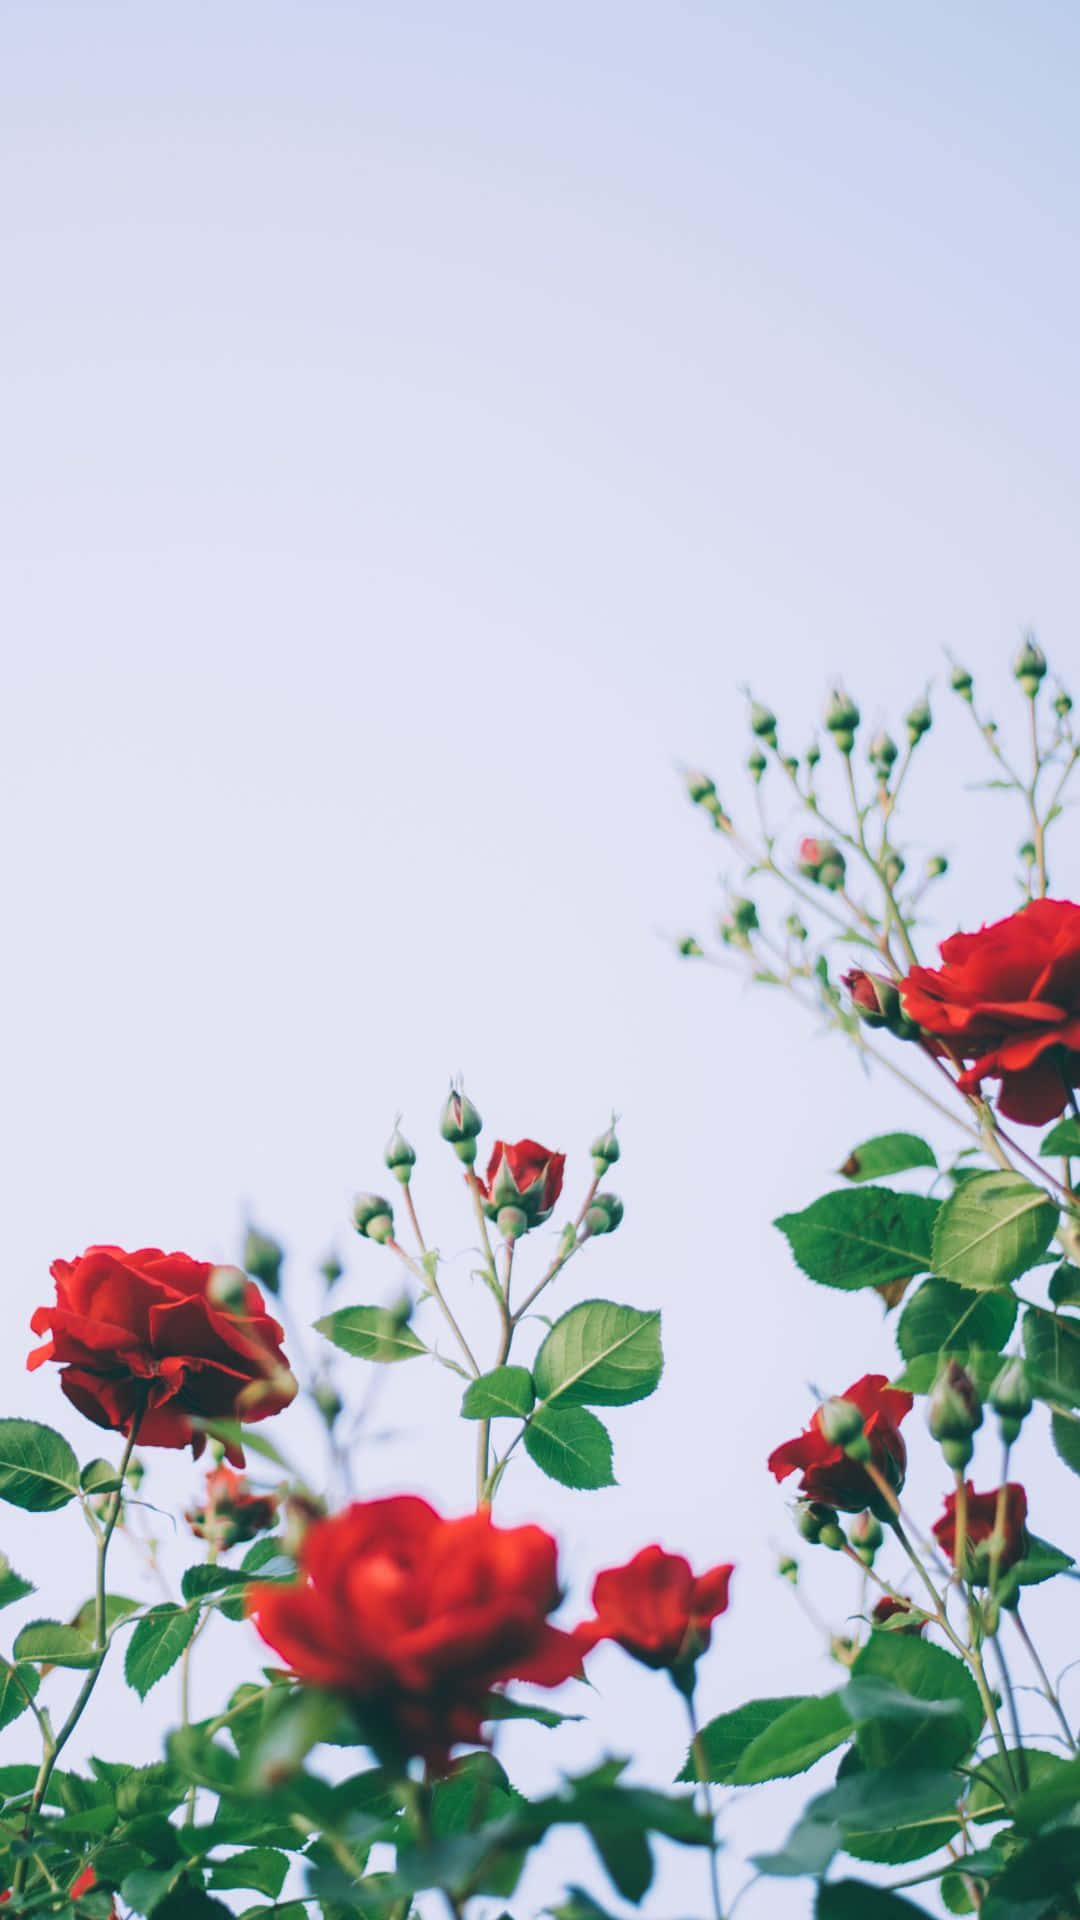 A Single Rose Blooming for an Unforgettable Moment Wallpaper